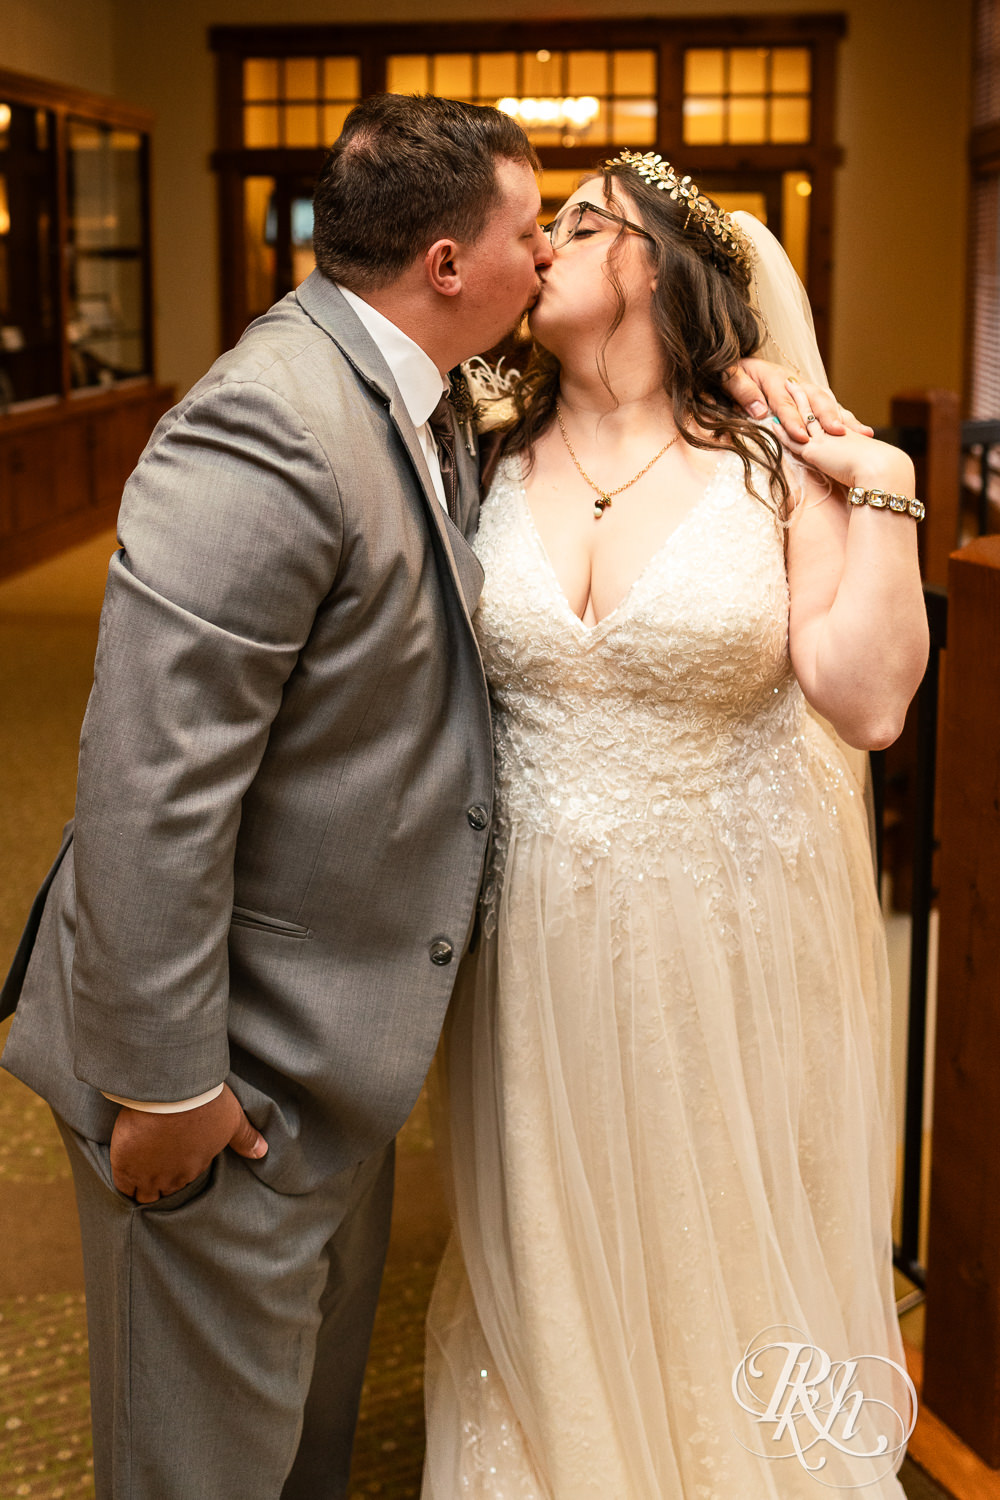 Bride and groom kiss at Bunker Hills Event Center in Coon Rapids, Minnesota.